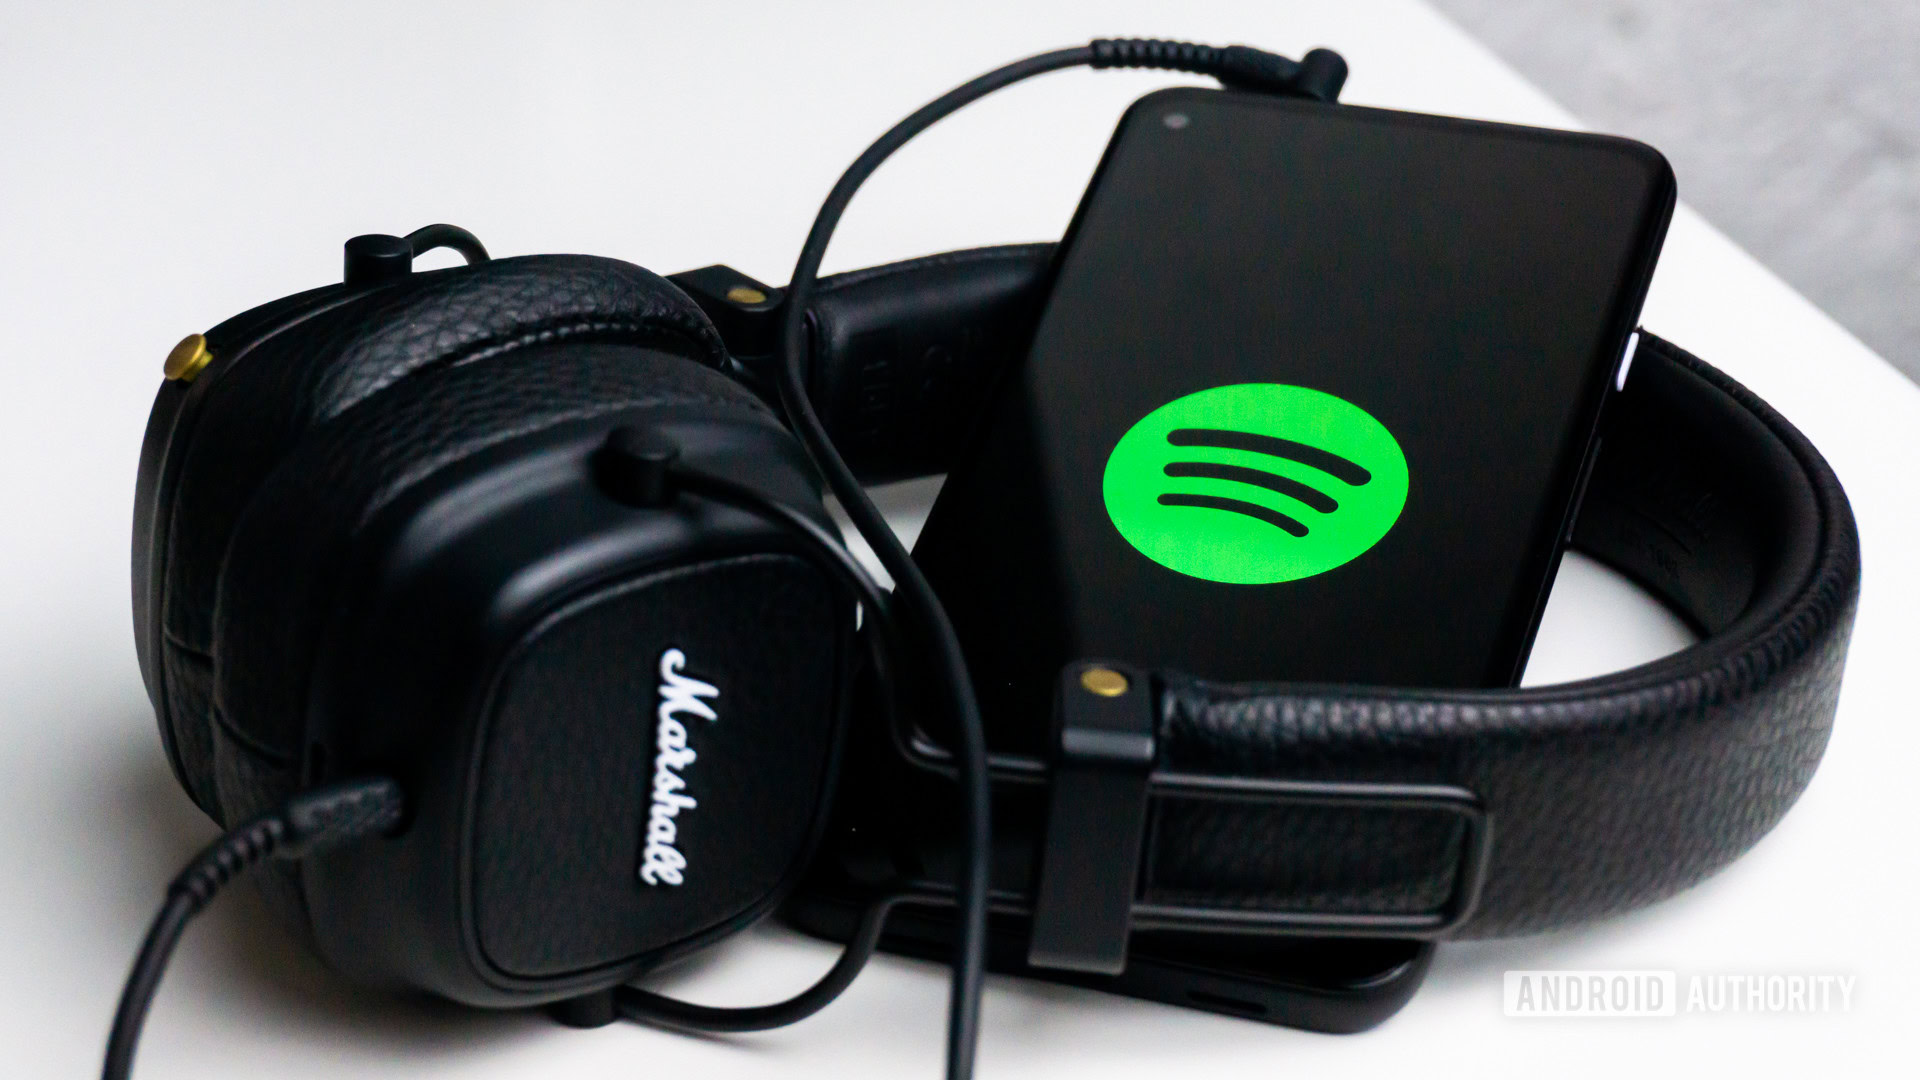 Spotify on mobile with a pair of headphones